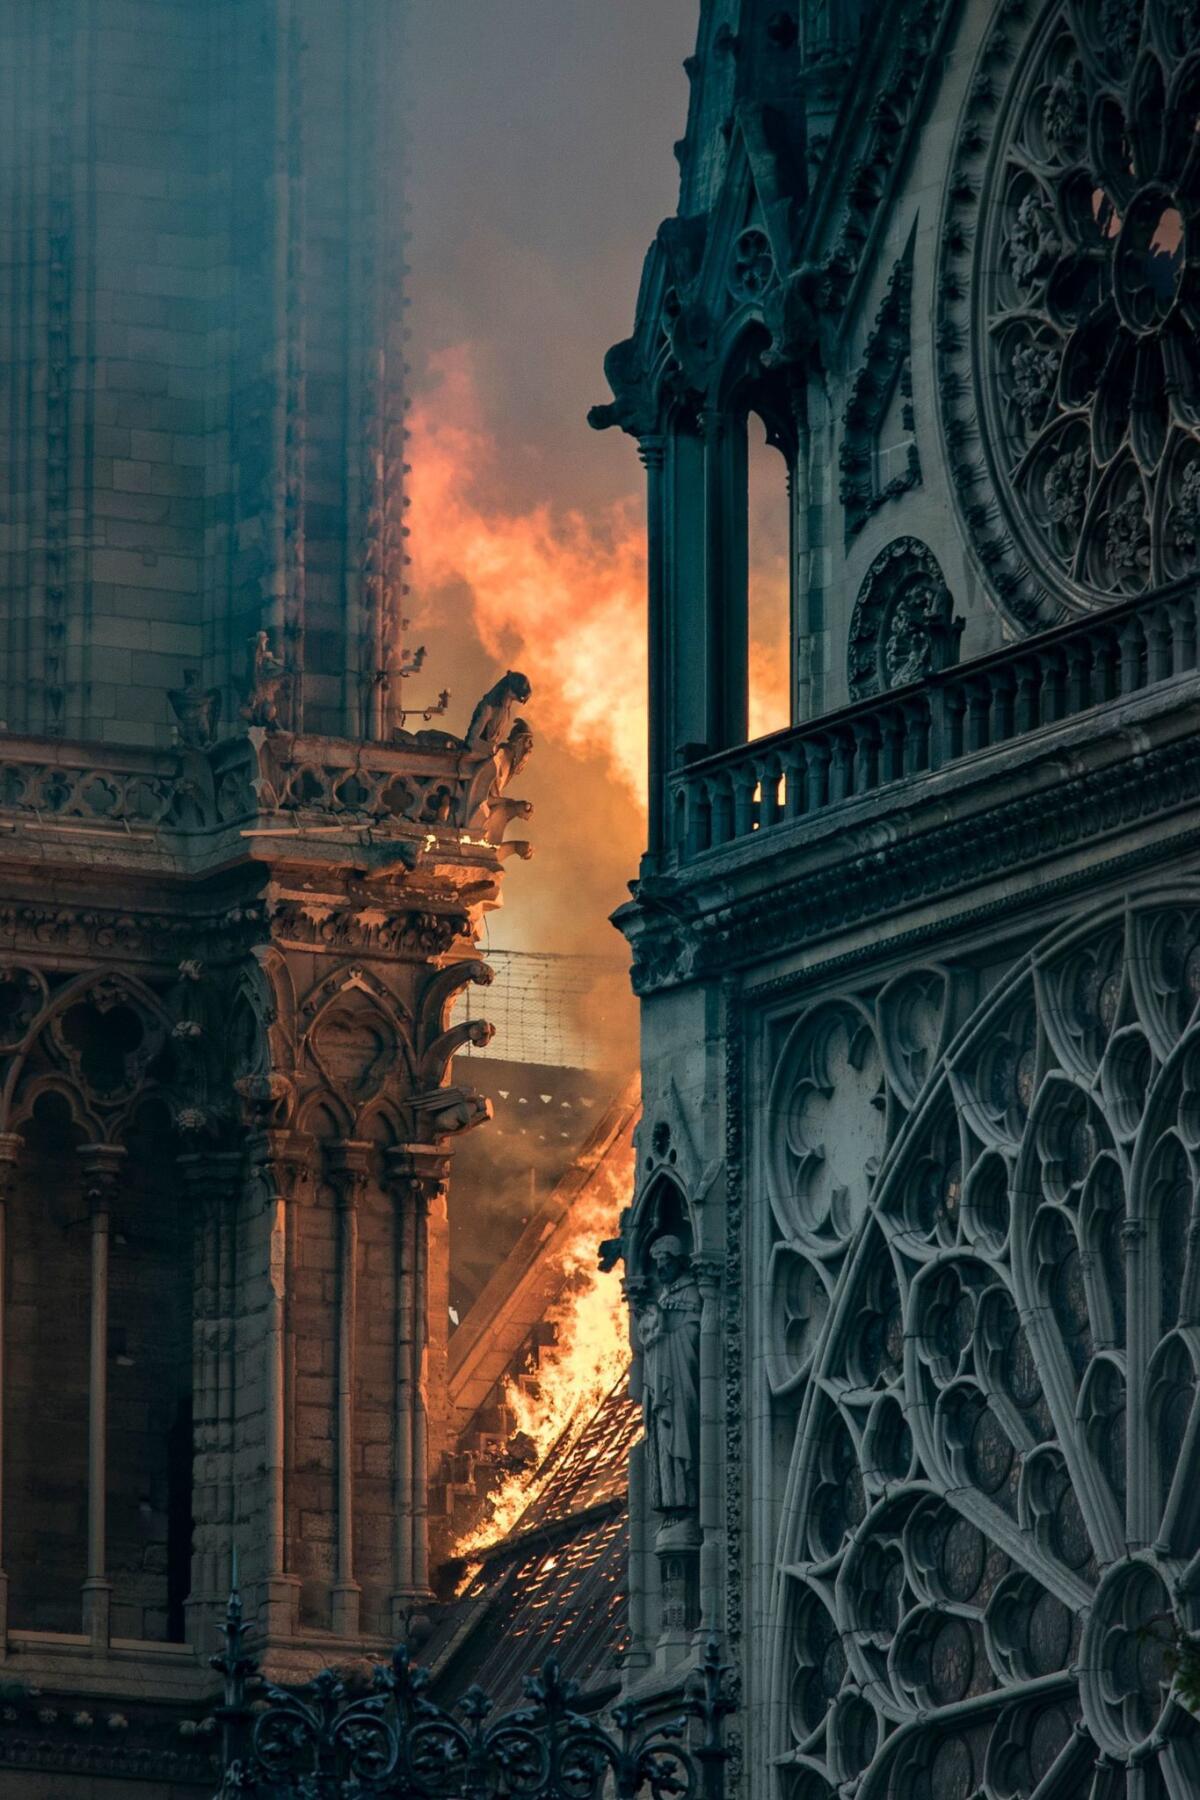 Flames and smoke are seen billowing from the roof at Notre-Dame Cathedral in Paris on April 15, 2019. - A huge fire swept through the roof of the famed Notre-Dame Cathedral in central Paris on April 15, 2019, sending flames and huge clouds of grey smoke billowing into the sky. The flames and smoke plumed from the spire and roof of the gothic cathedral, visited by millions of people a year. A spokesman for the cathedral told AFP that the wooden structure supporting the roof was being gutted by the blaze. (Photo by THOMAS SAMSON / AFP)THOMAS SAMSON/AFP/Getty Images ** OUTS - ELSENT, FPG, CM - OUTS * NM, PH, VA if sourced by CT, LA or MoD **